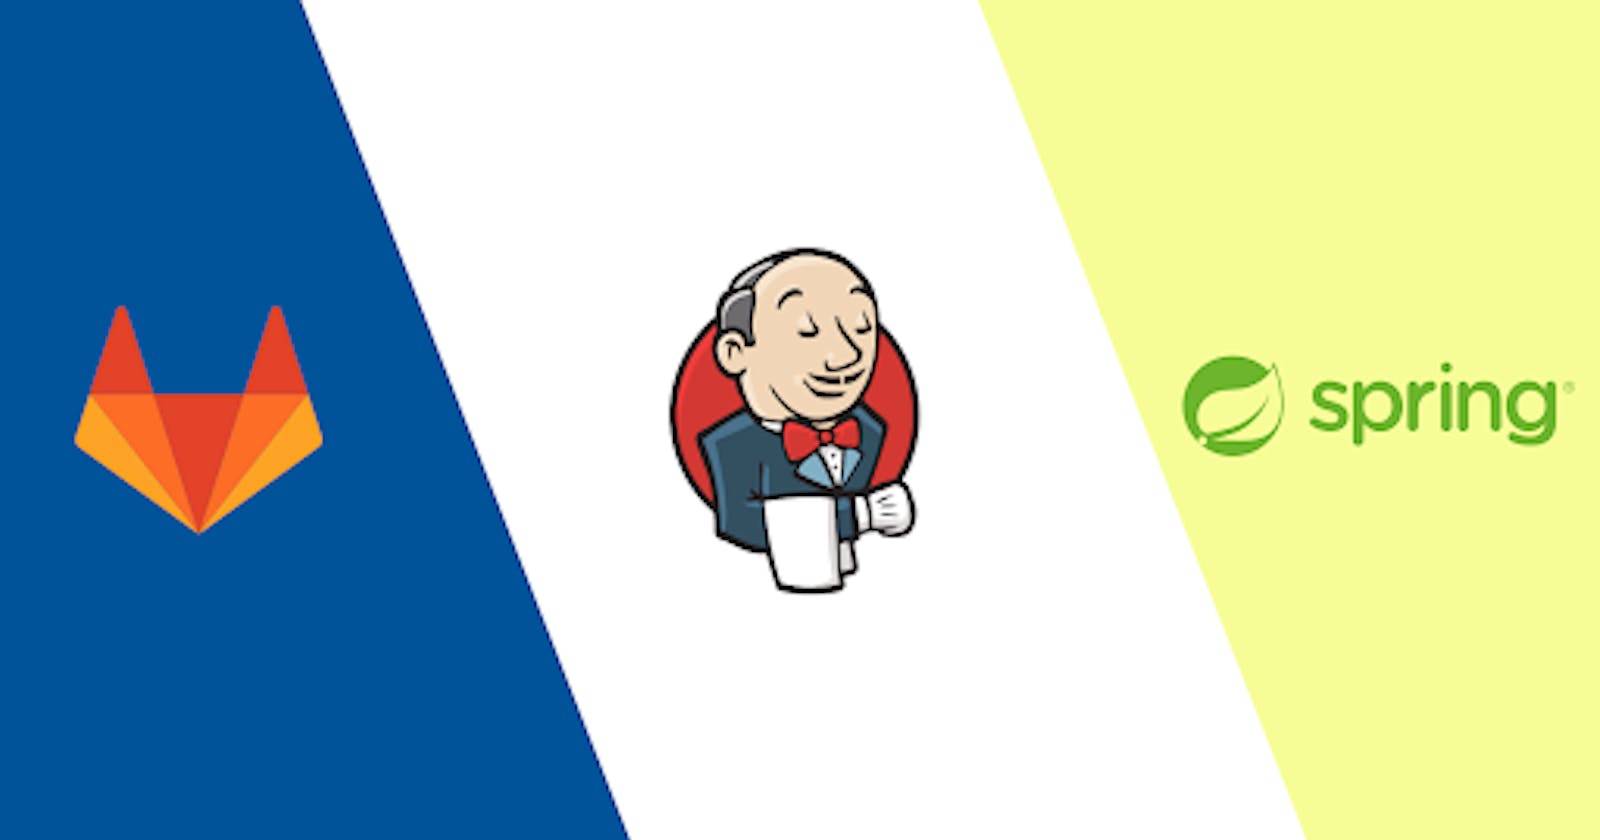 Continues Integration using Jenkins for Java(Spring)